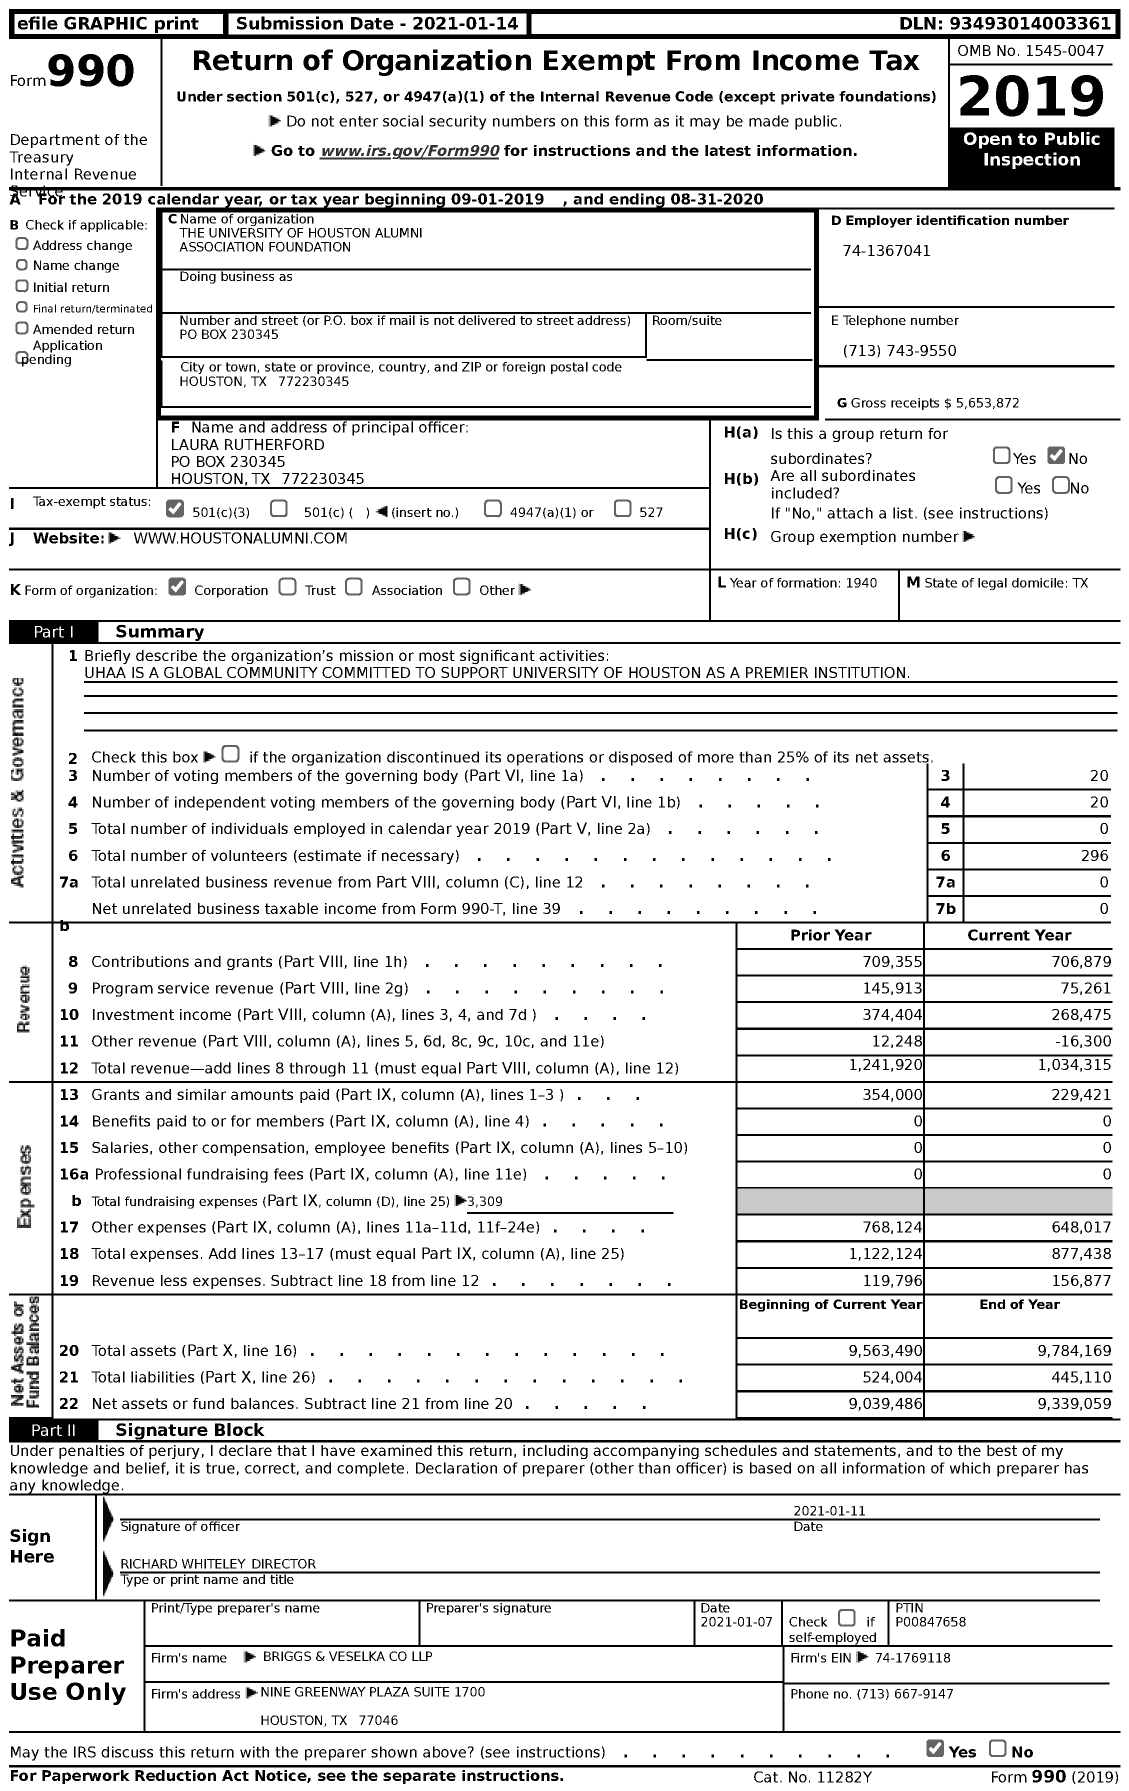 Image of first page of 2019 Form 990 for The University of Houston Alumni Association Foundation